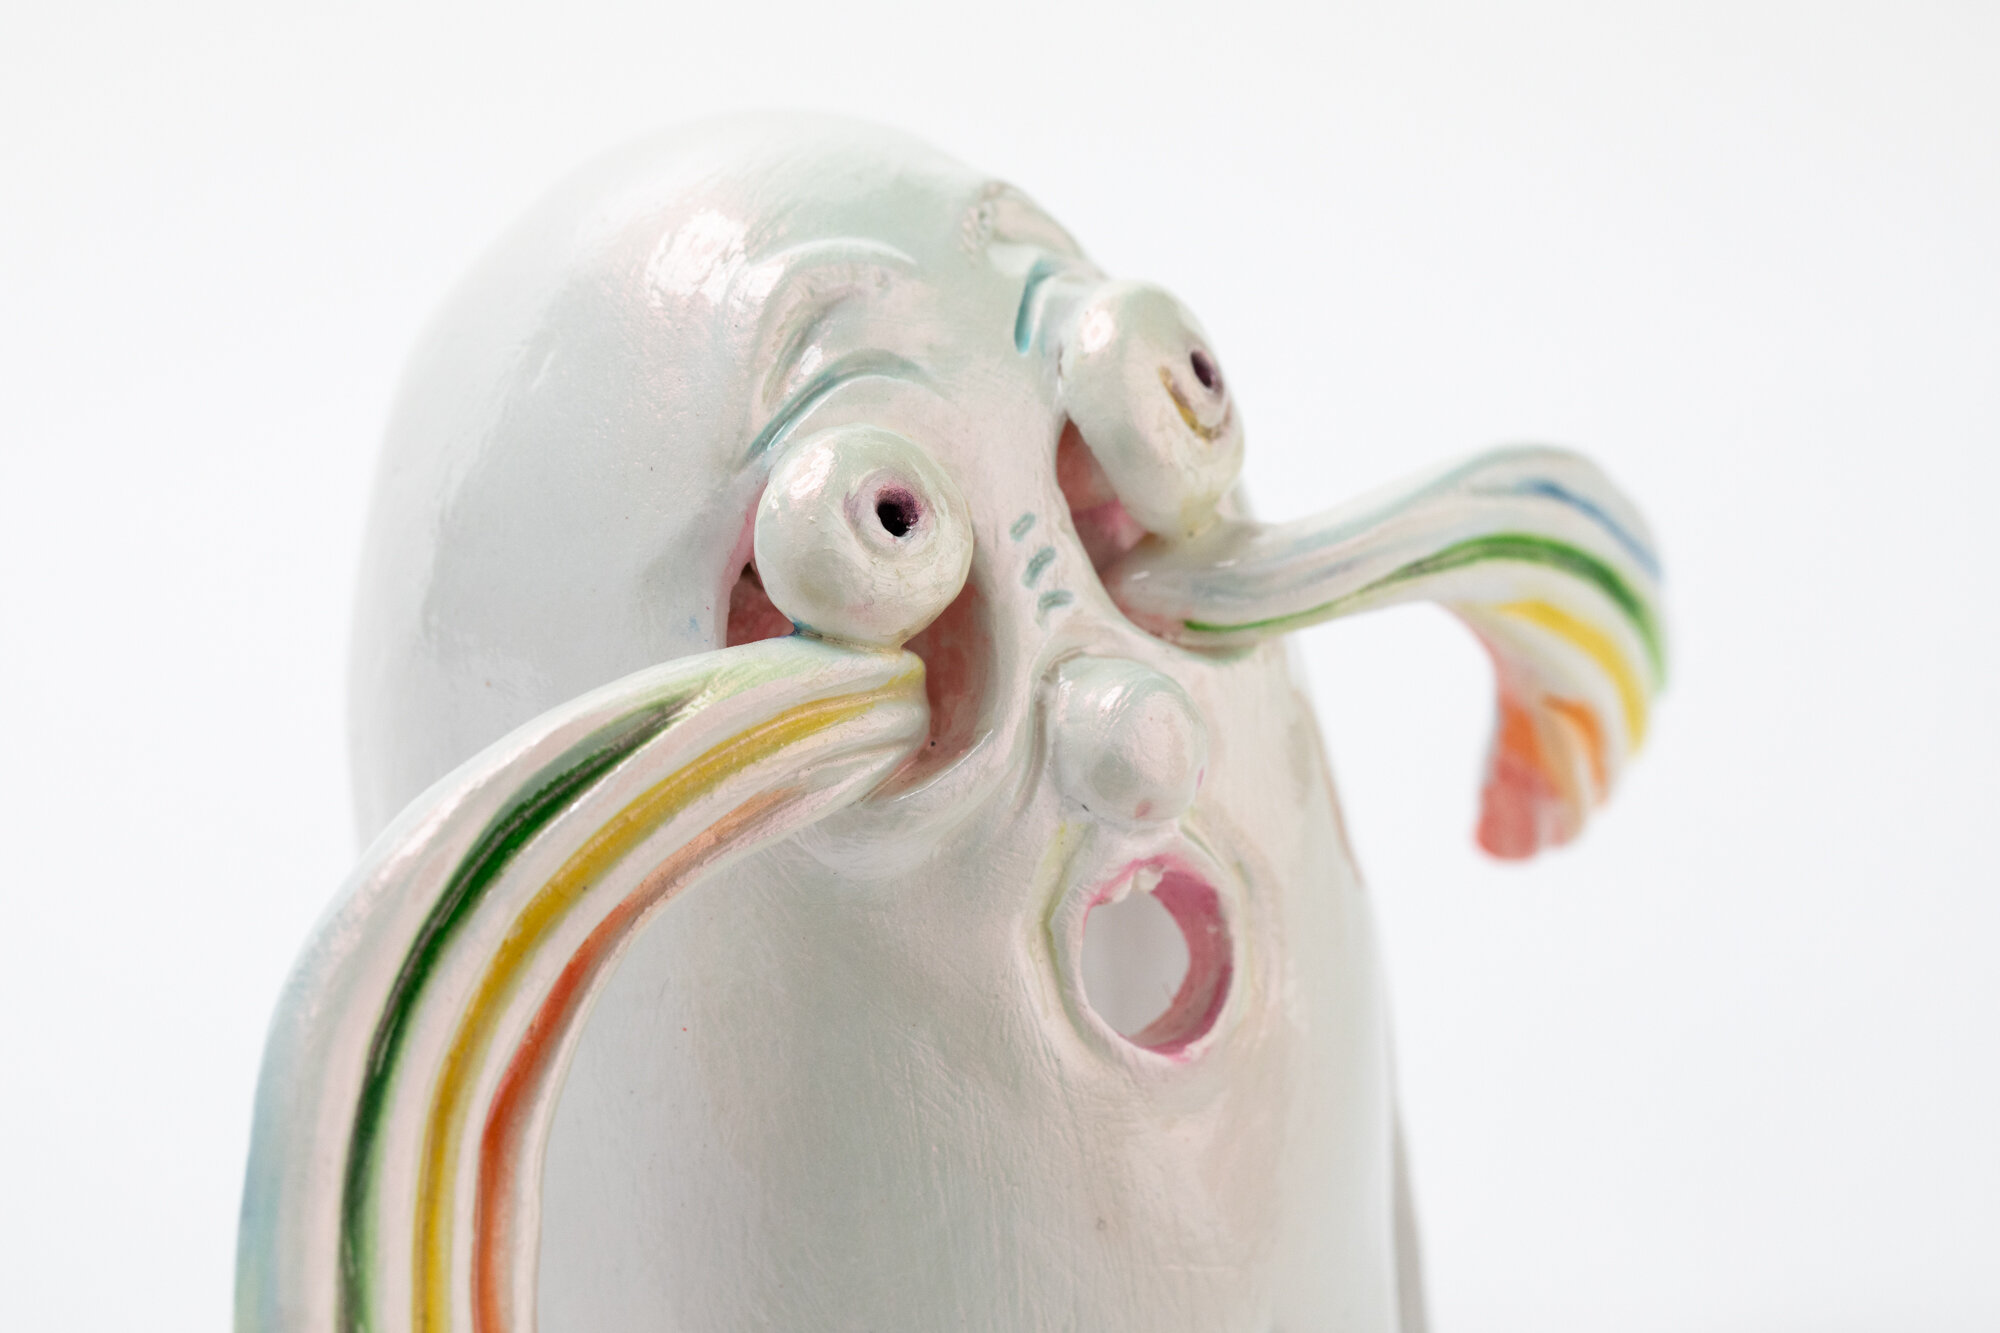 Detail of a painted ceramic sculpture of a ghost crying rainbow tears.